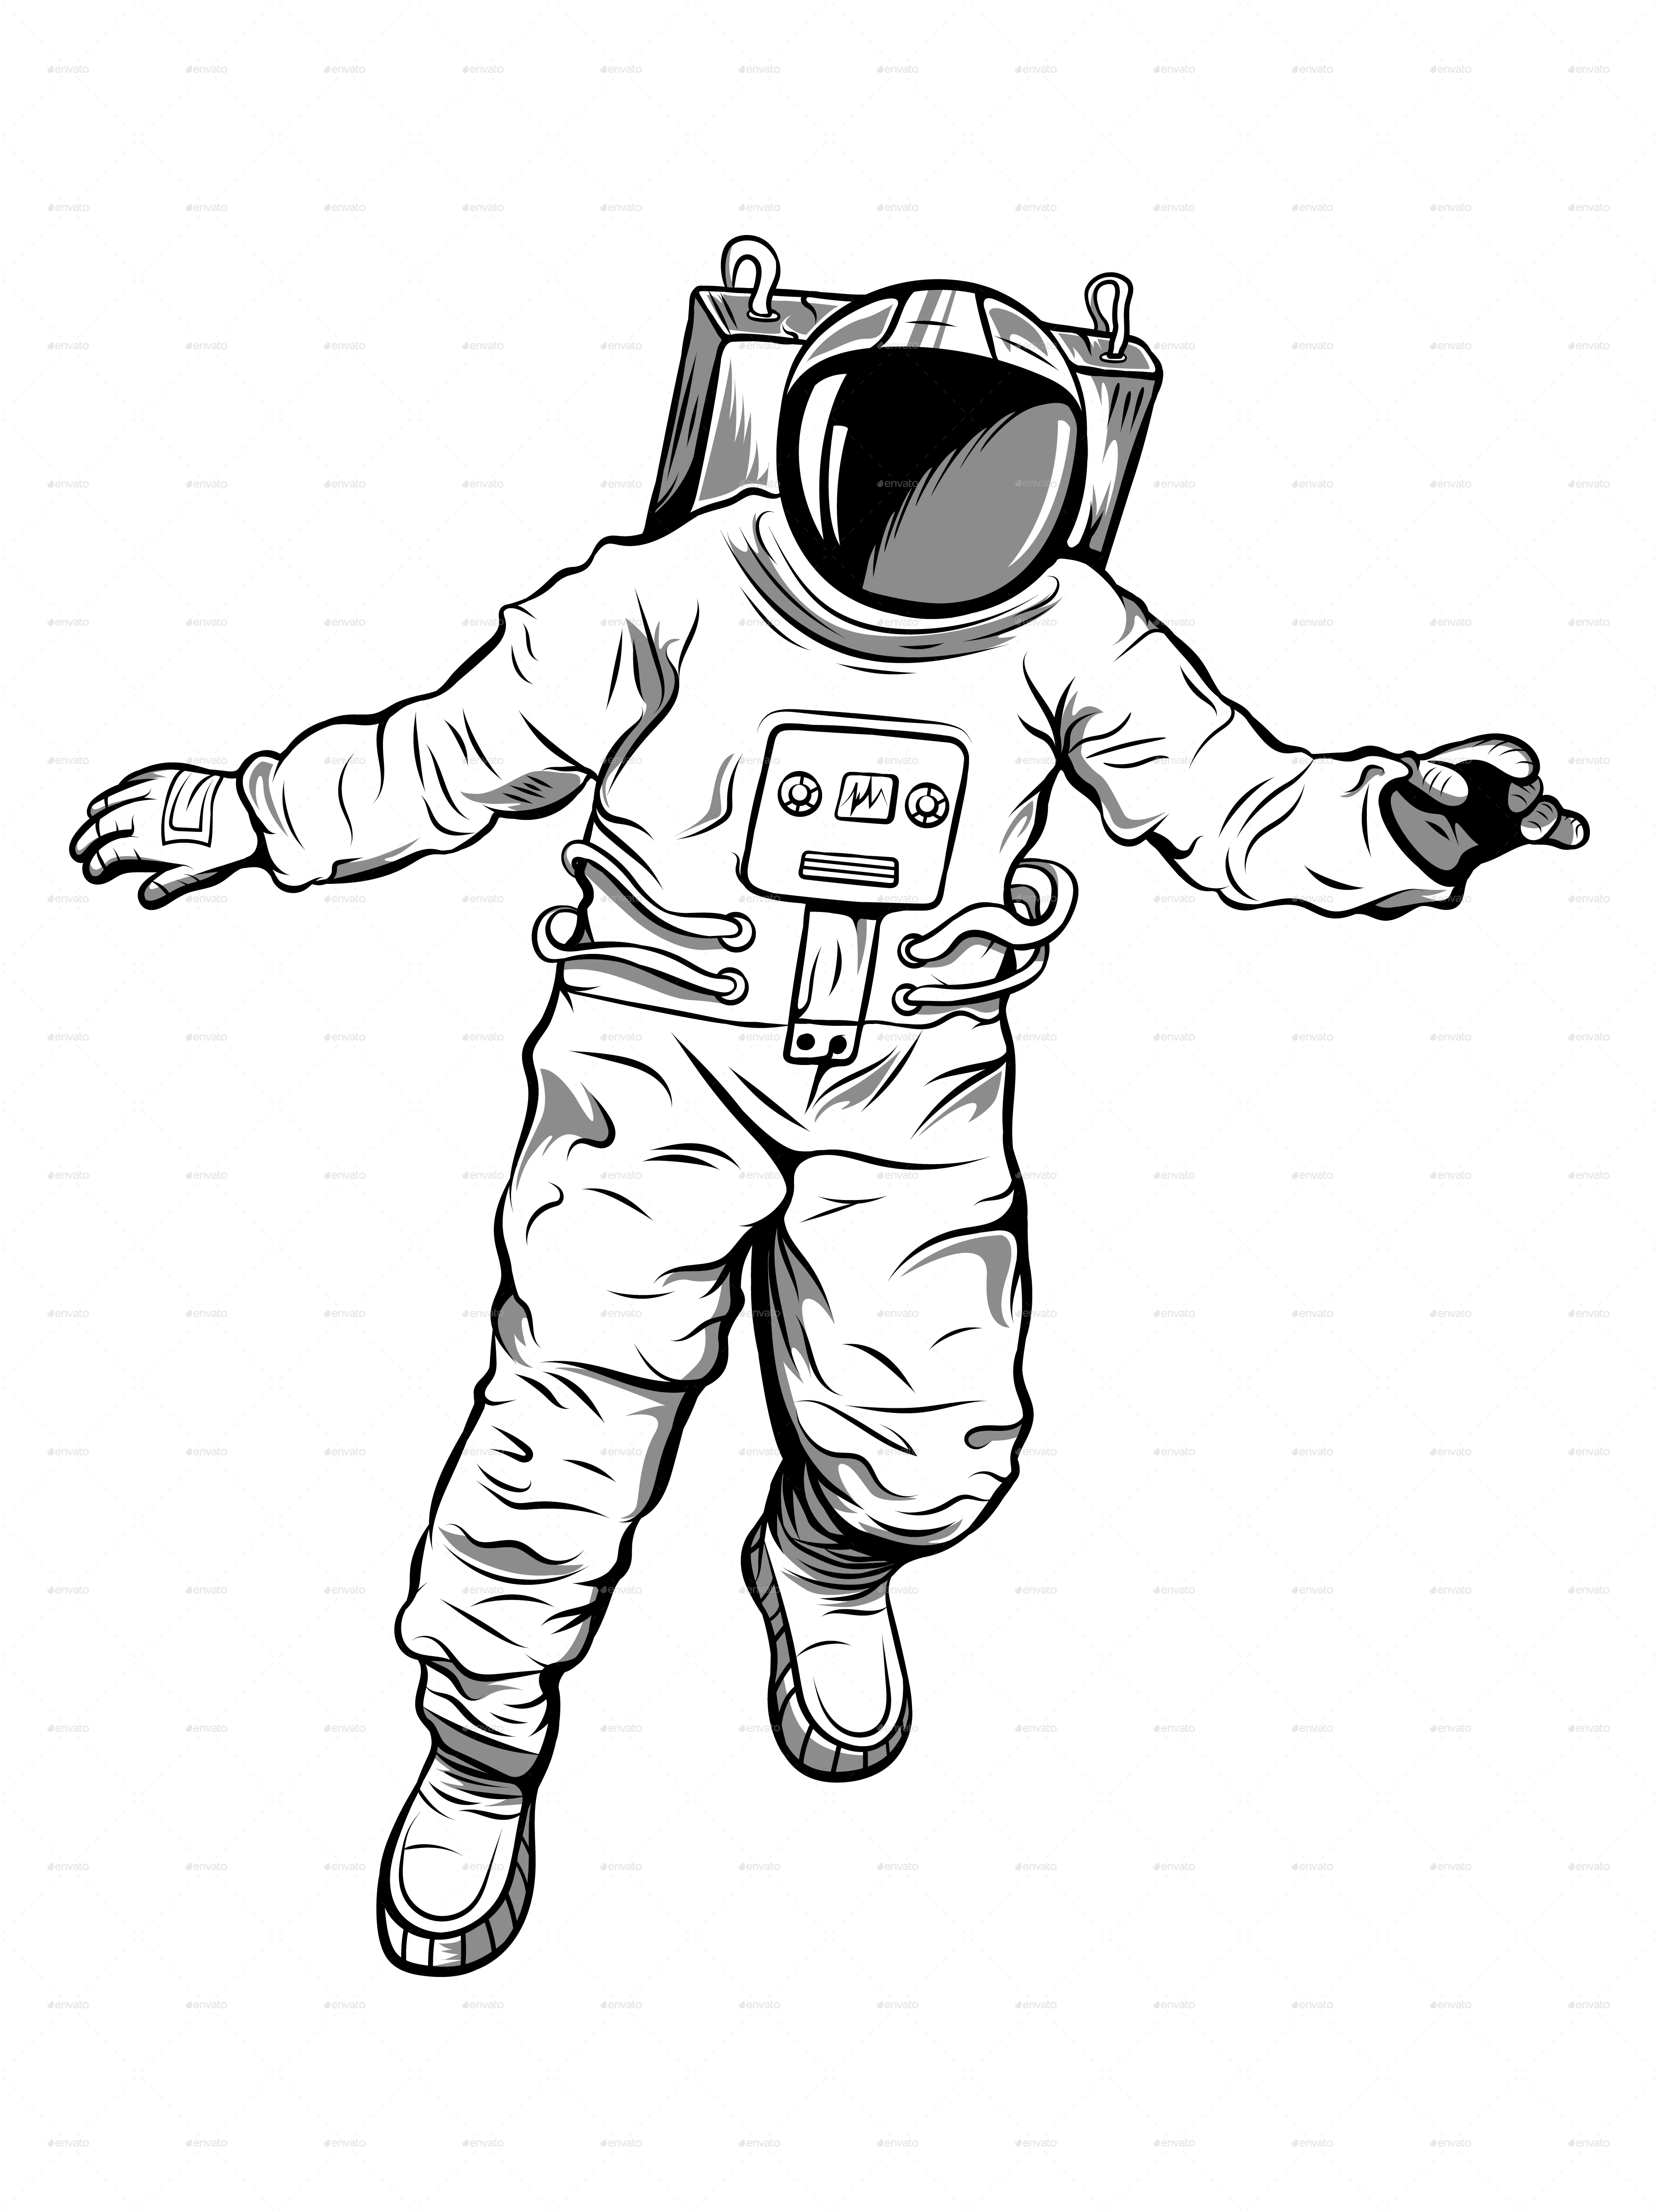 Floating Astronaut Illustration by gdmteam | GraphicRiver